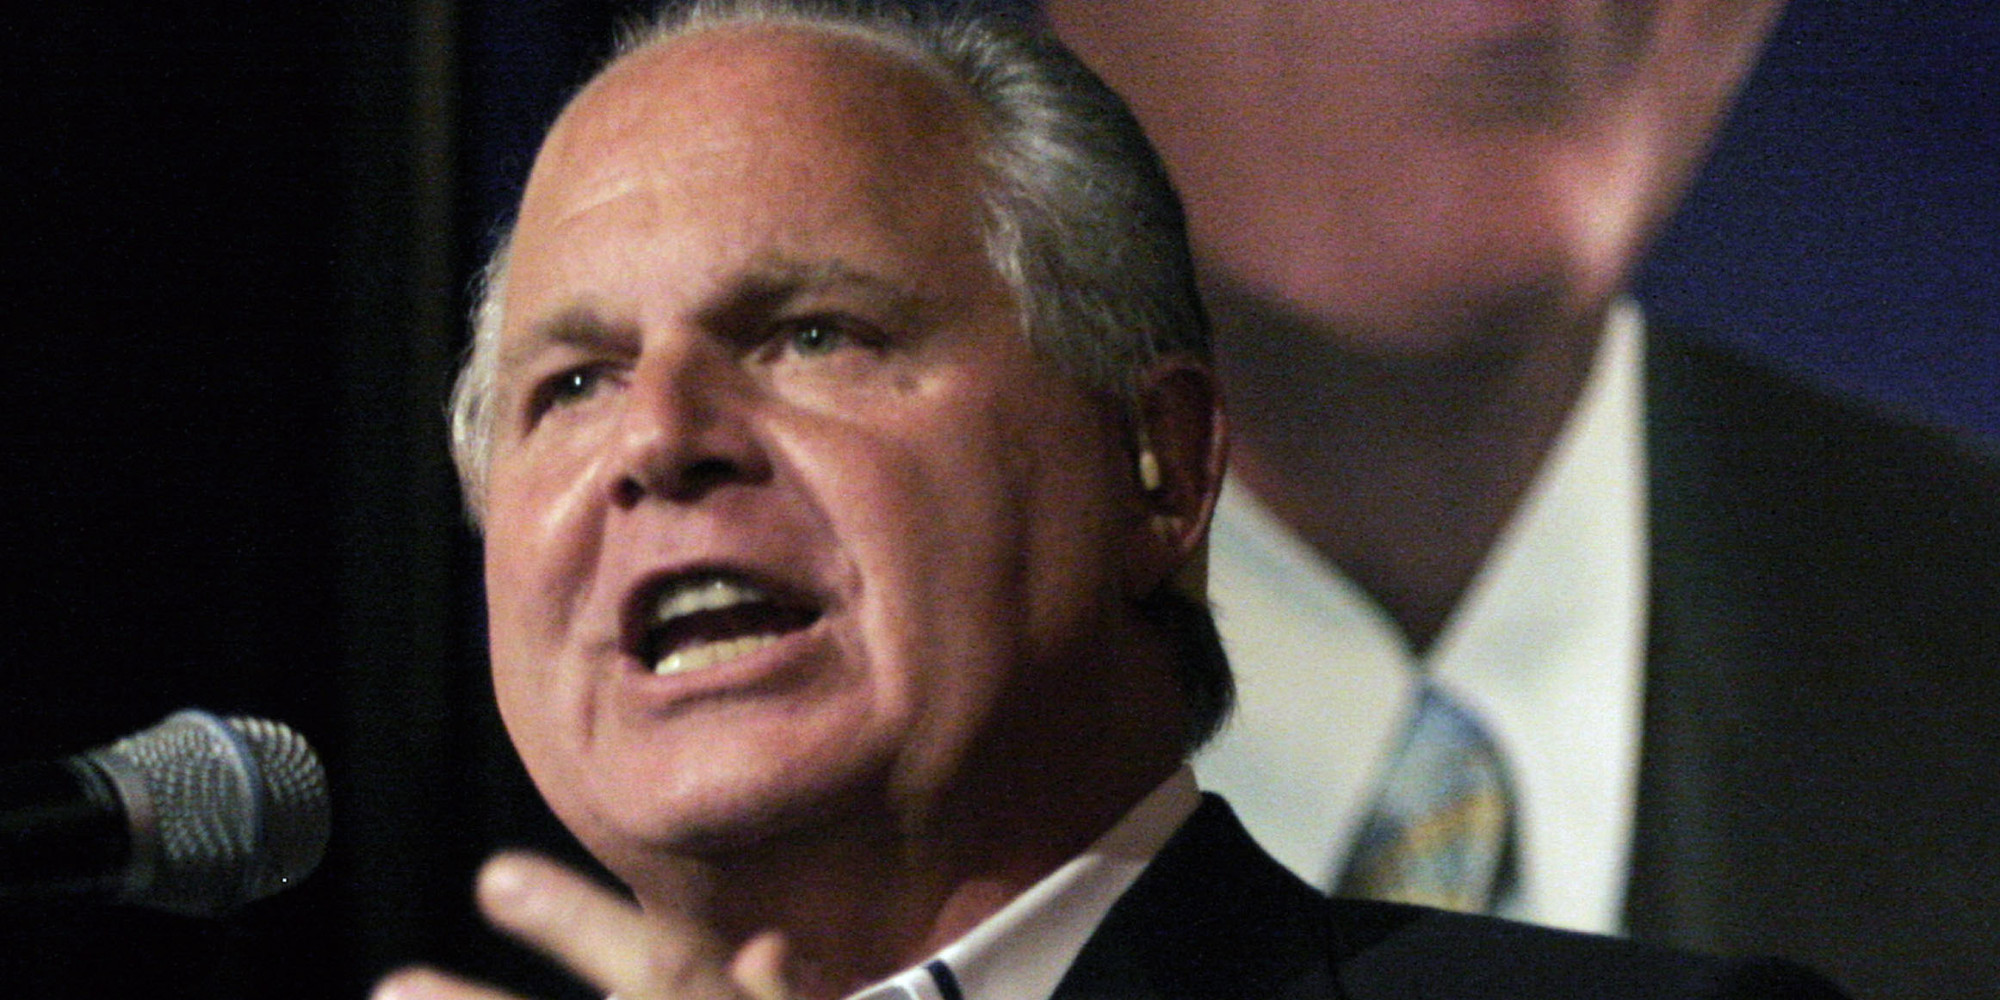 Rush Limbaugh Says 'Black Uncle Tom Voters' Boosted Thad Cochran To Primary Win | HuffPost